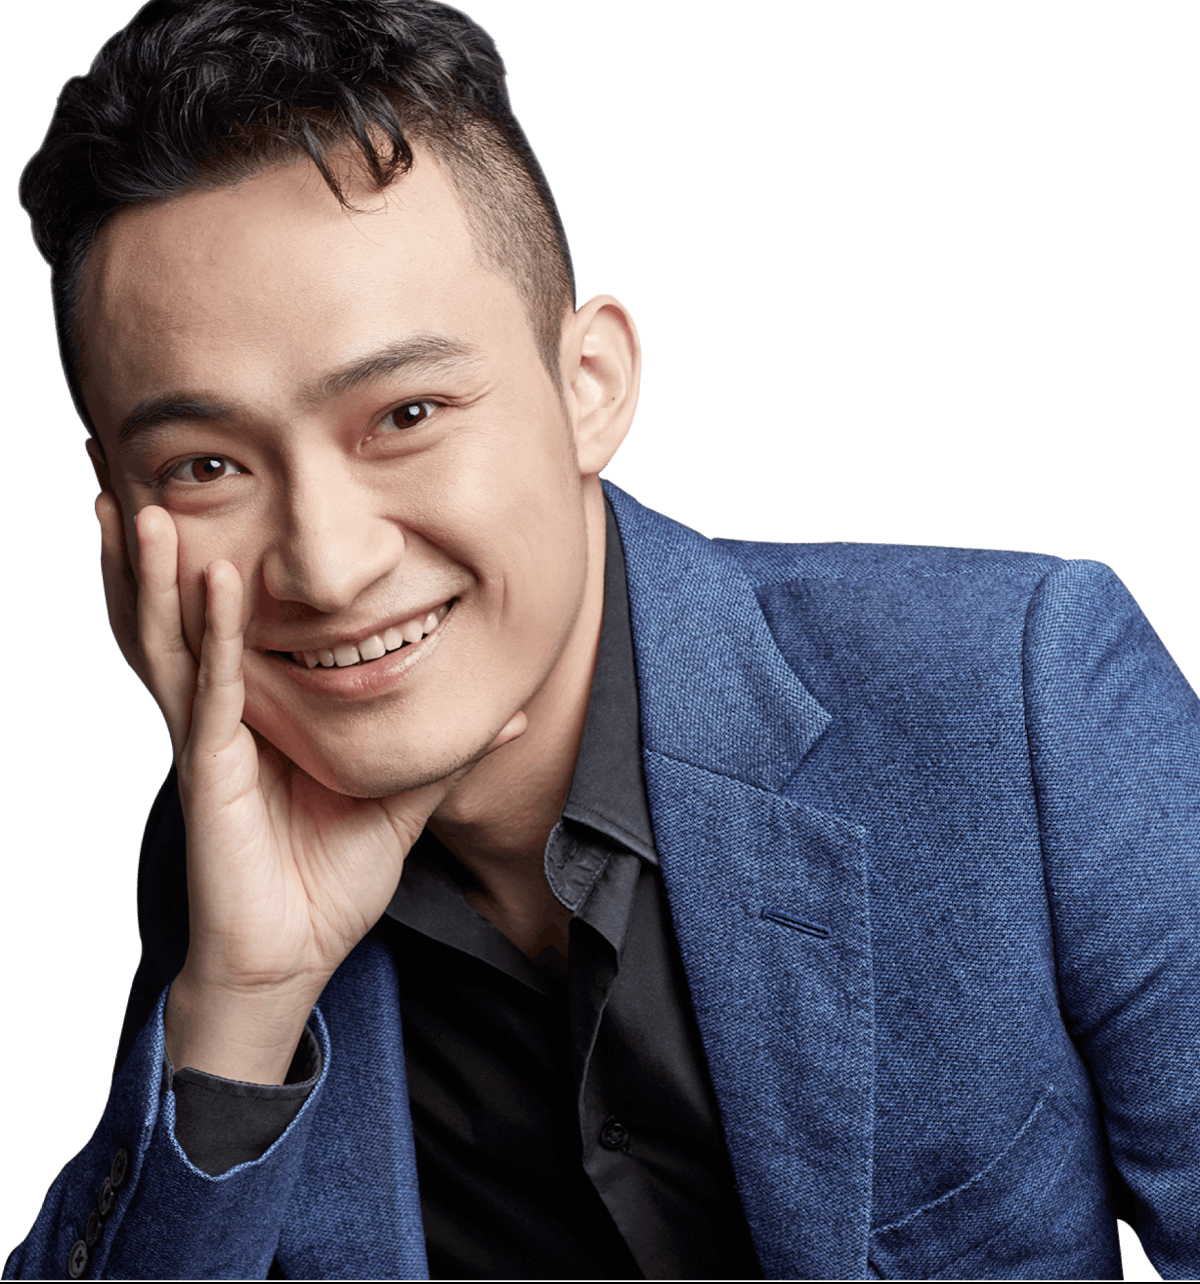 featured image - Justin Sun Discusses Blockchain Technology and How it Can Impact the World